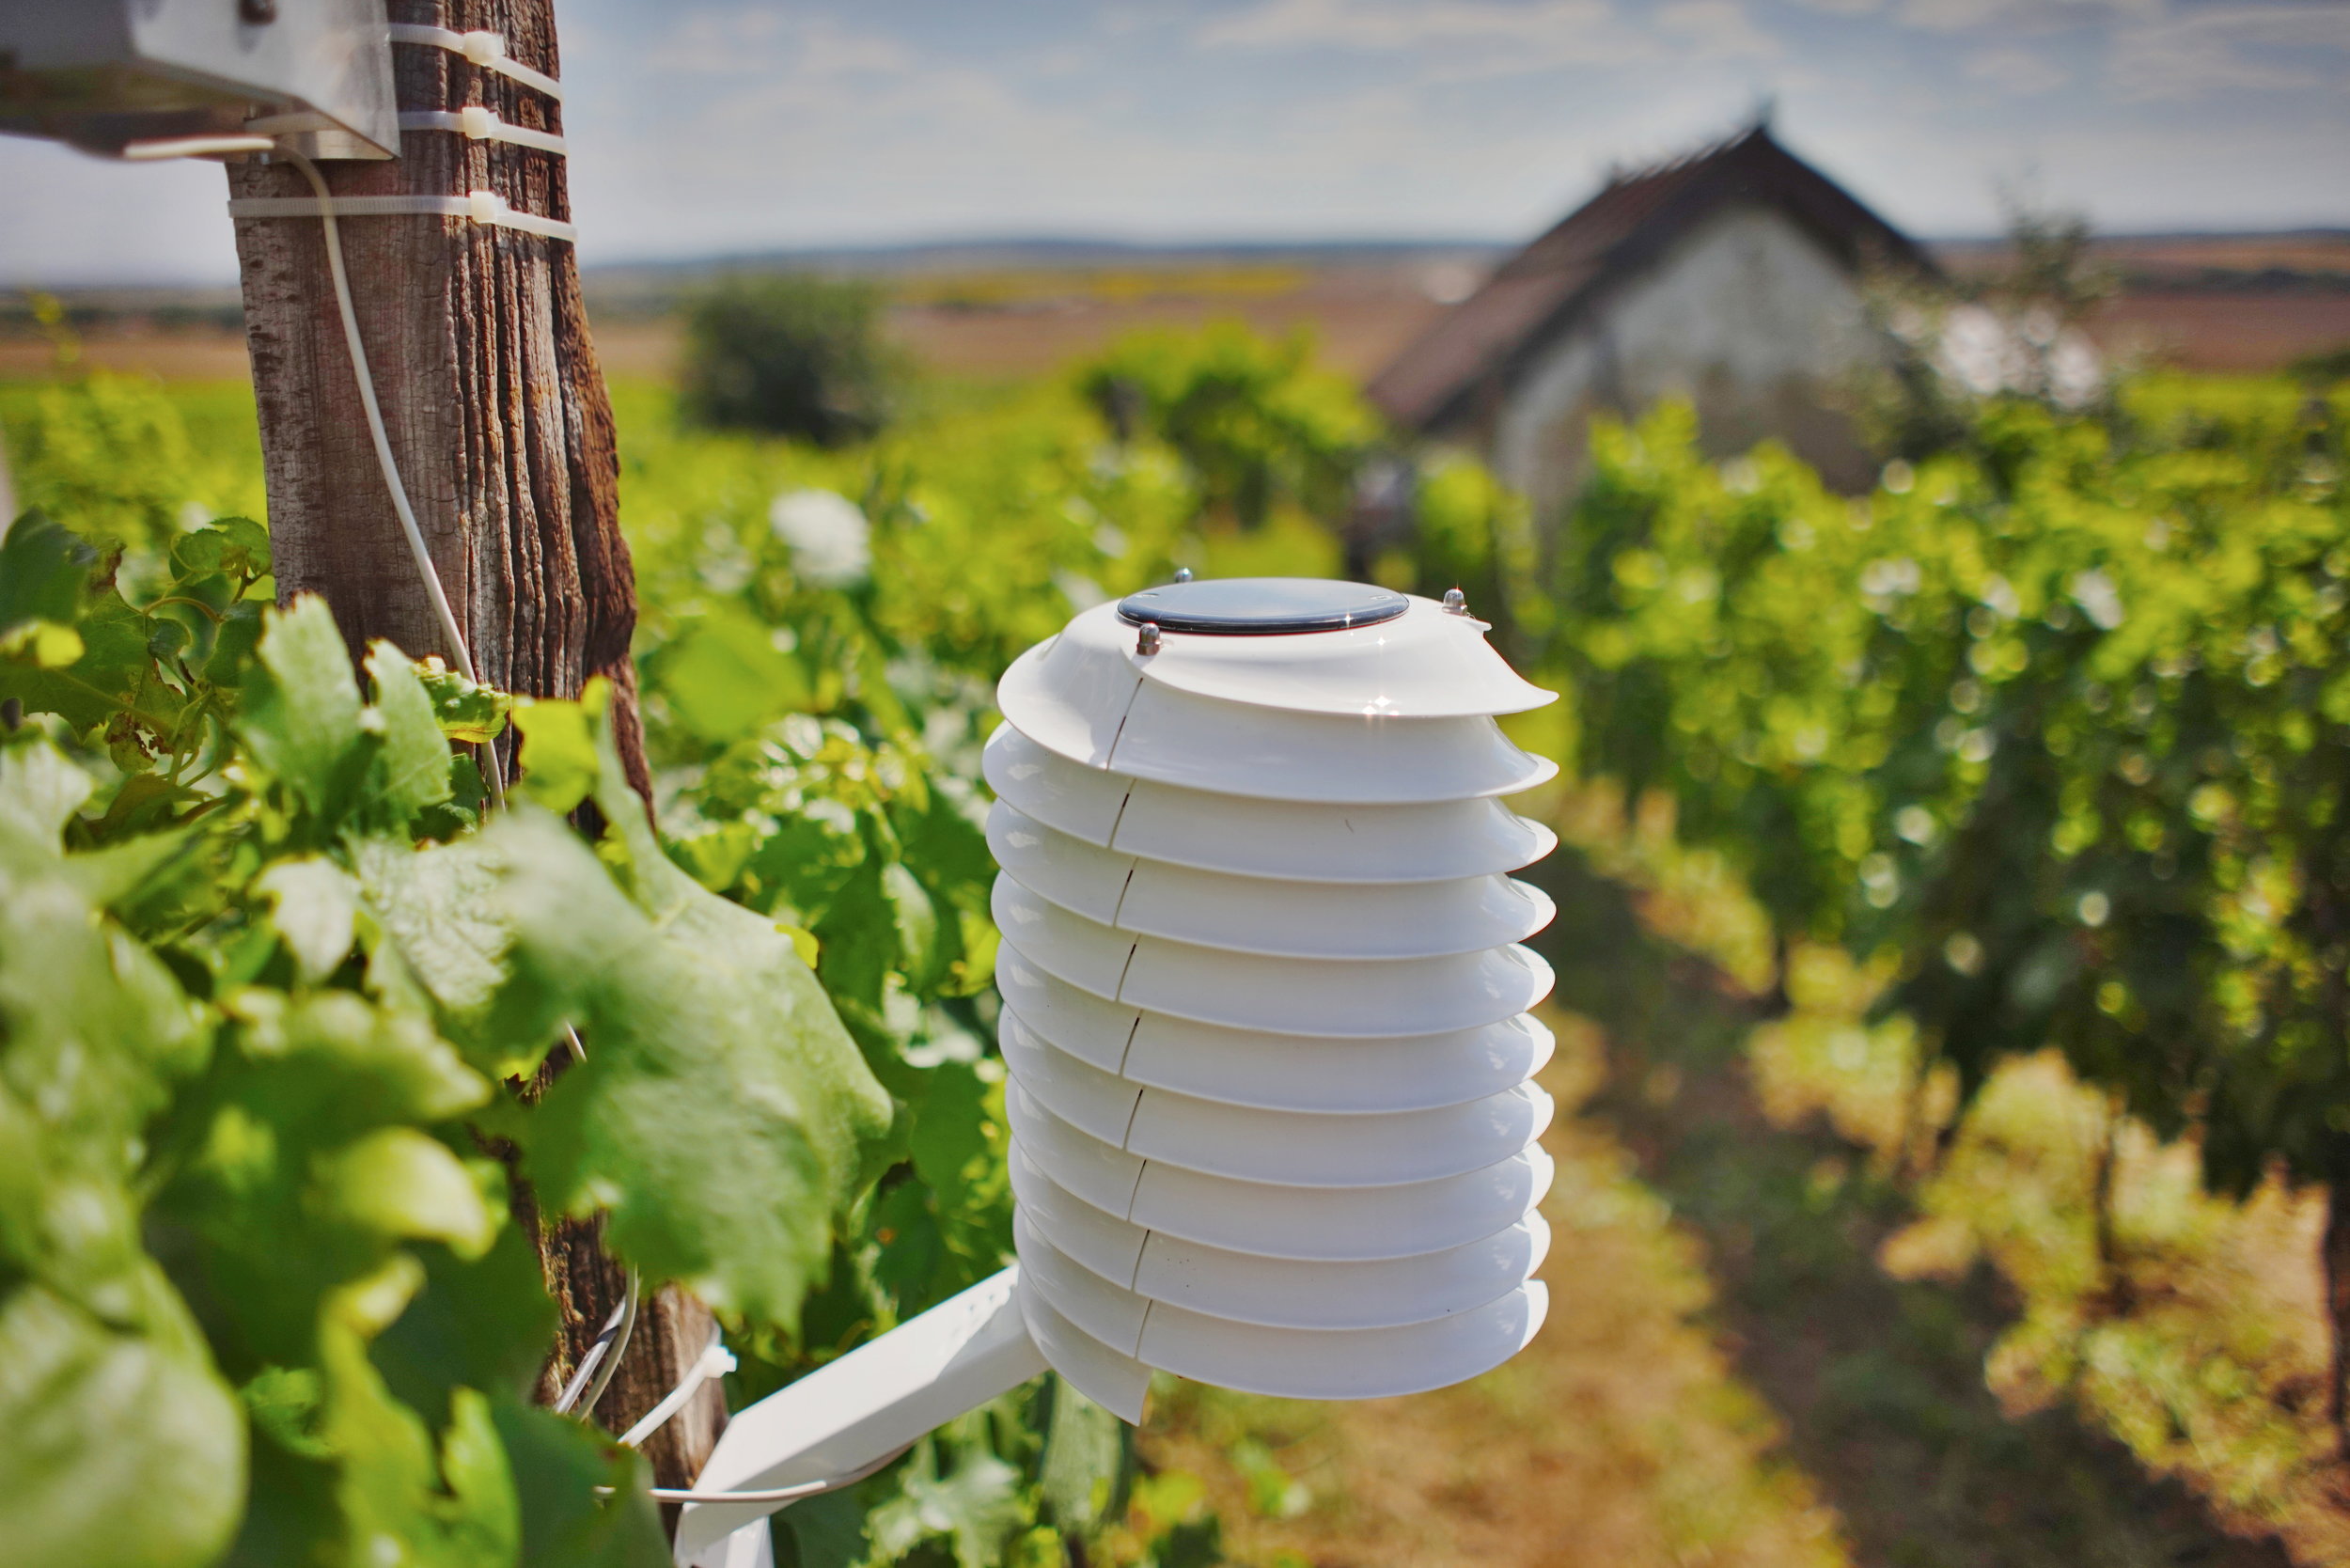 MeteoHelix Pro weather station for wine growing